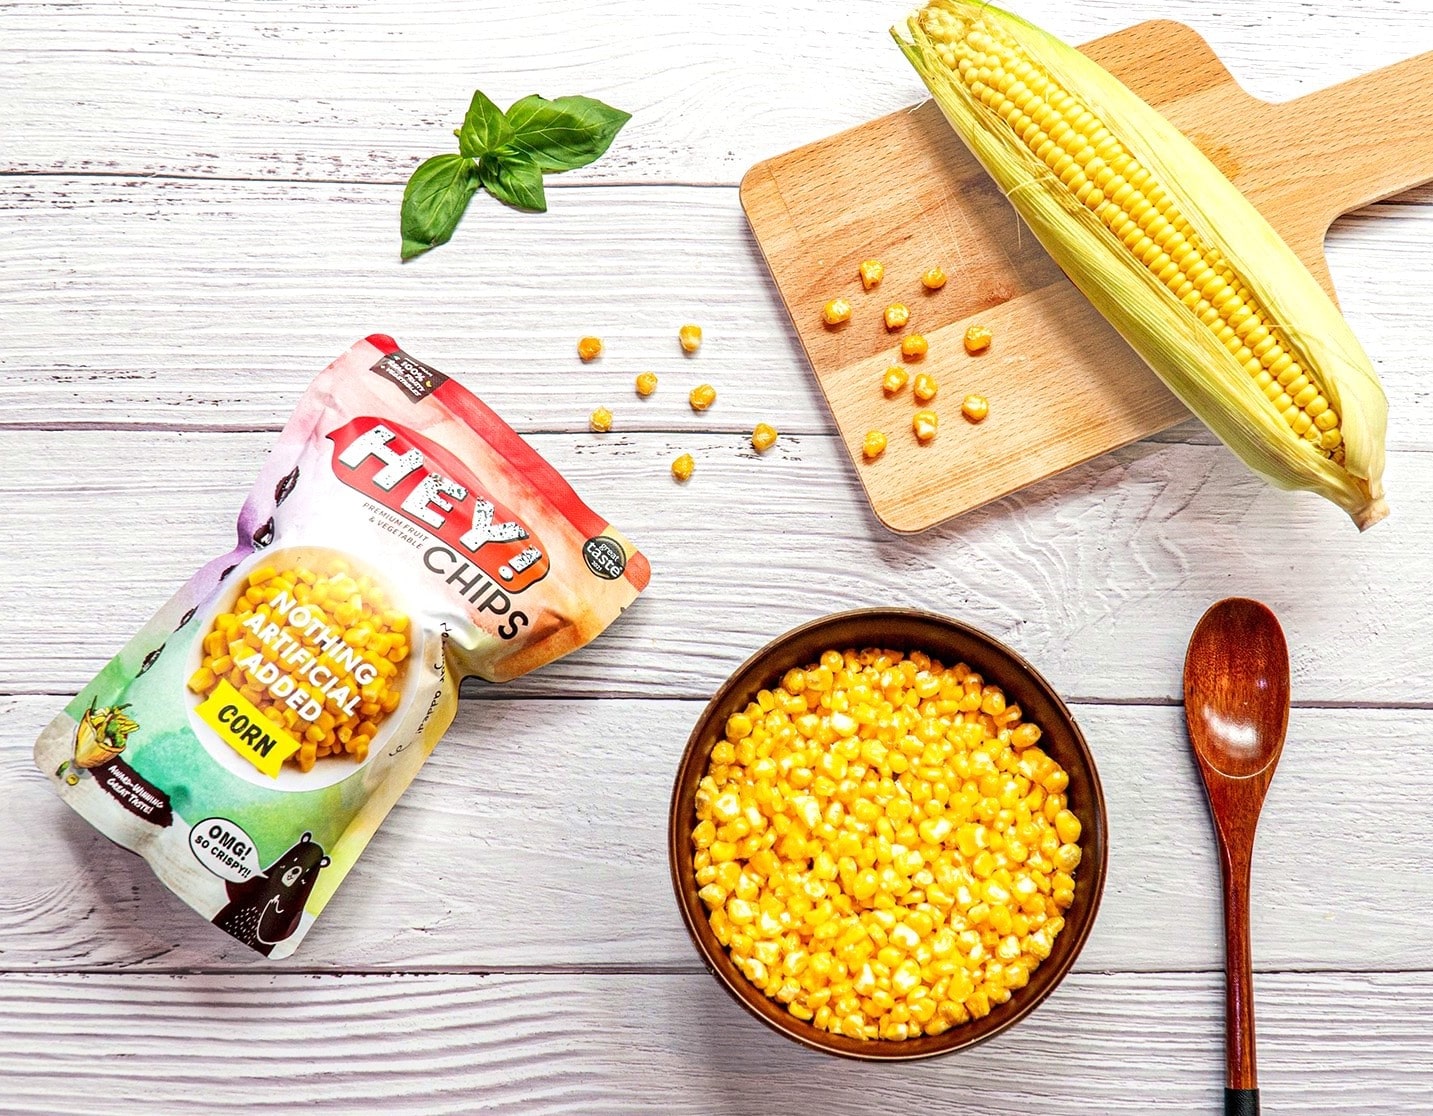 Local Start-up Hey! Chips Launches New Corn Chips Like No Other